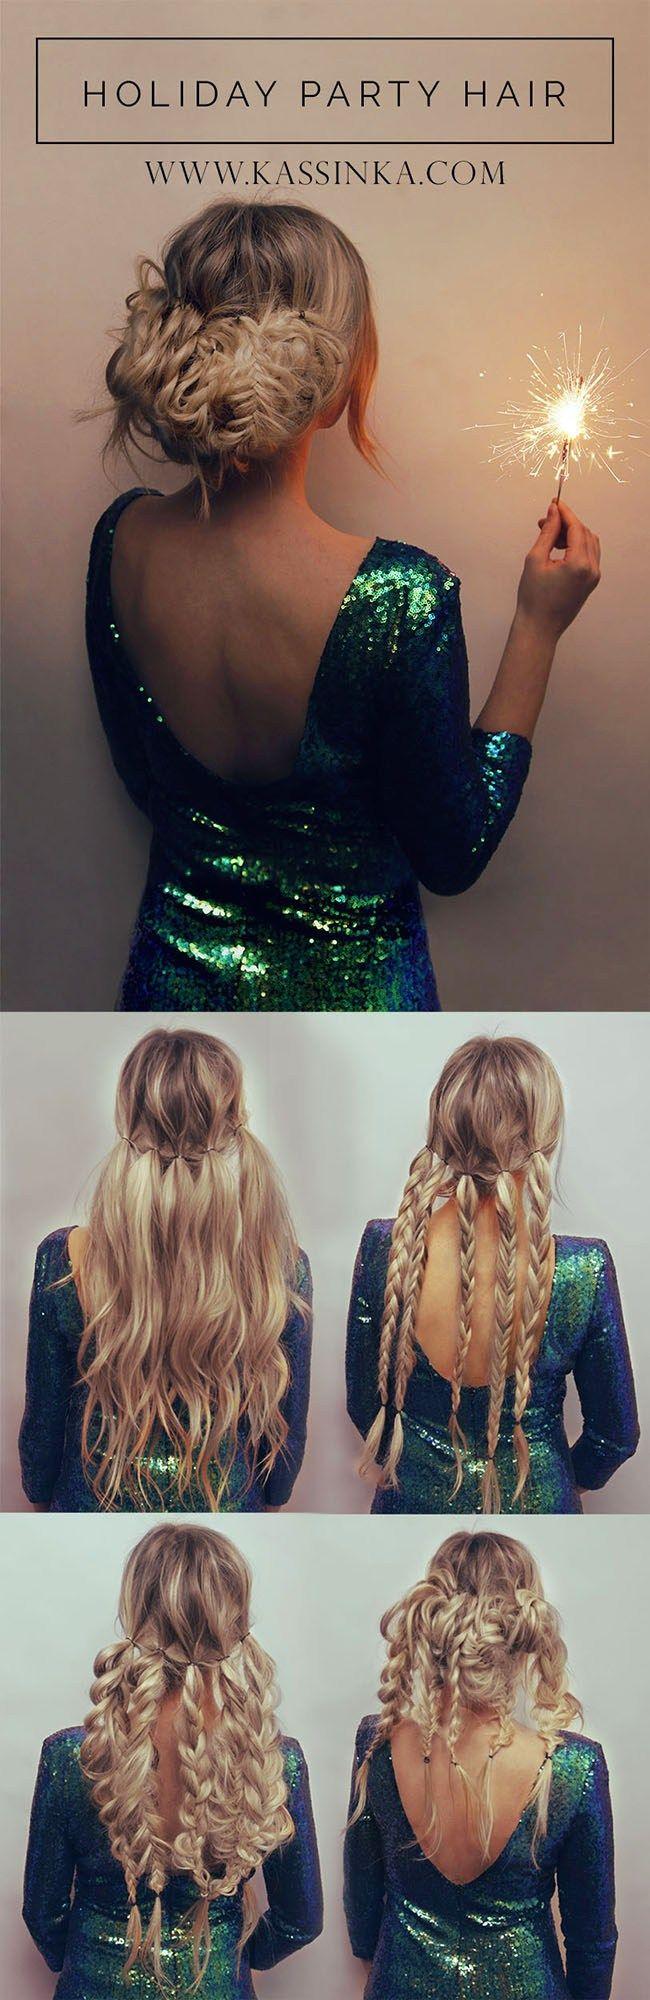 Wedding - Holiday Party Hair Tutorial